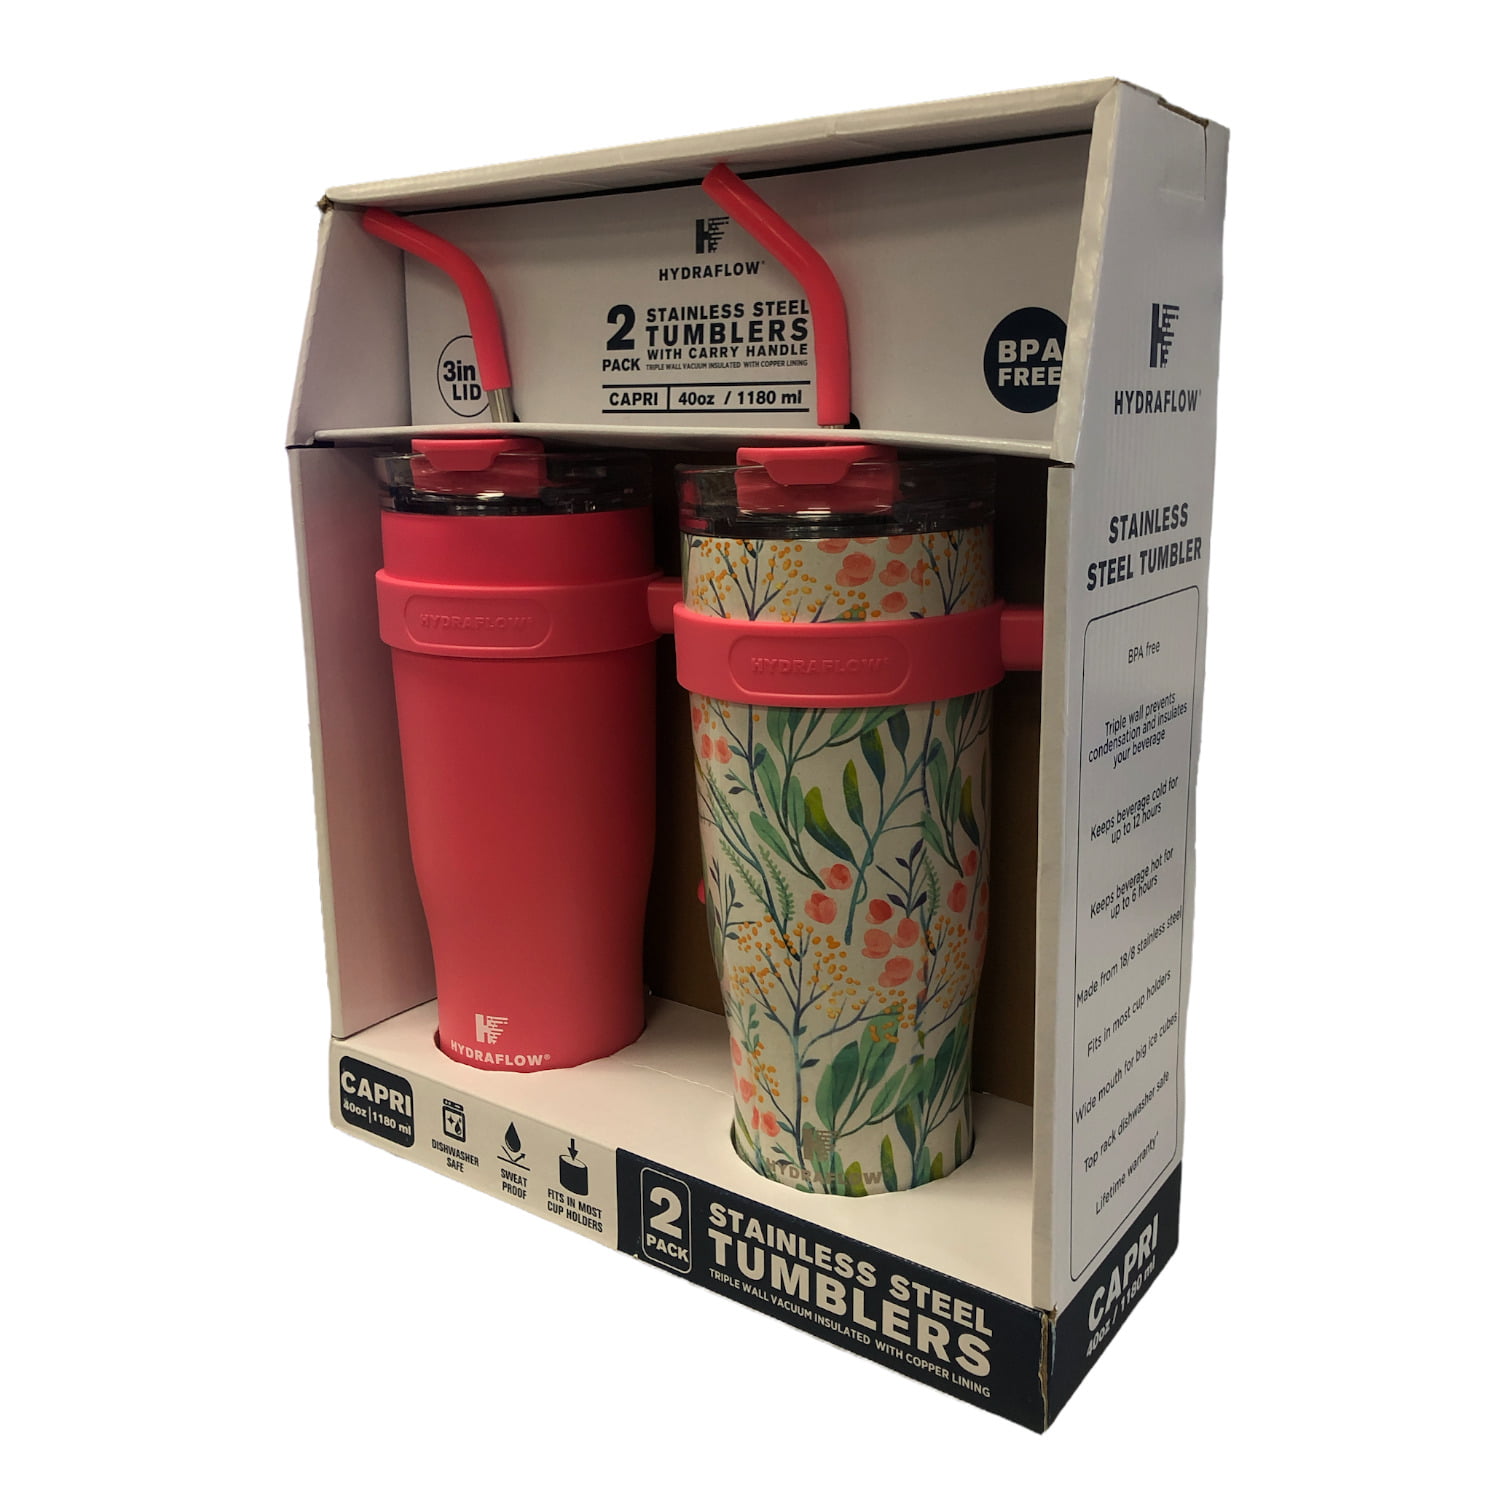 Hydraflow Tumblers on Sale  ONLY $14.99 with THIS code!